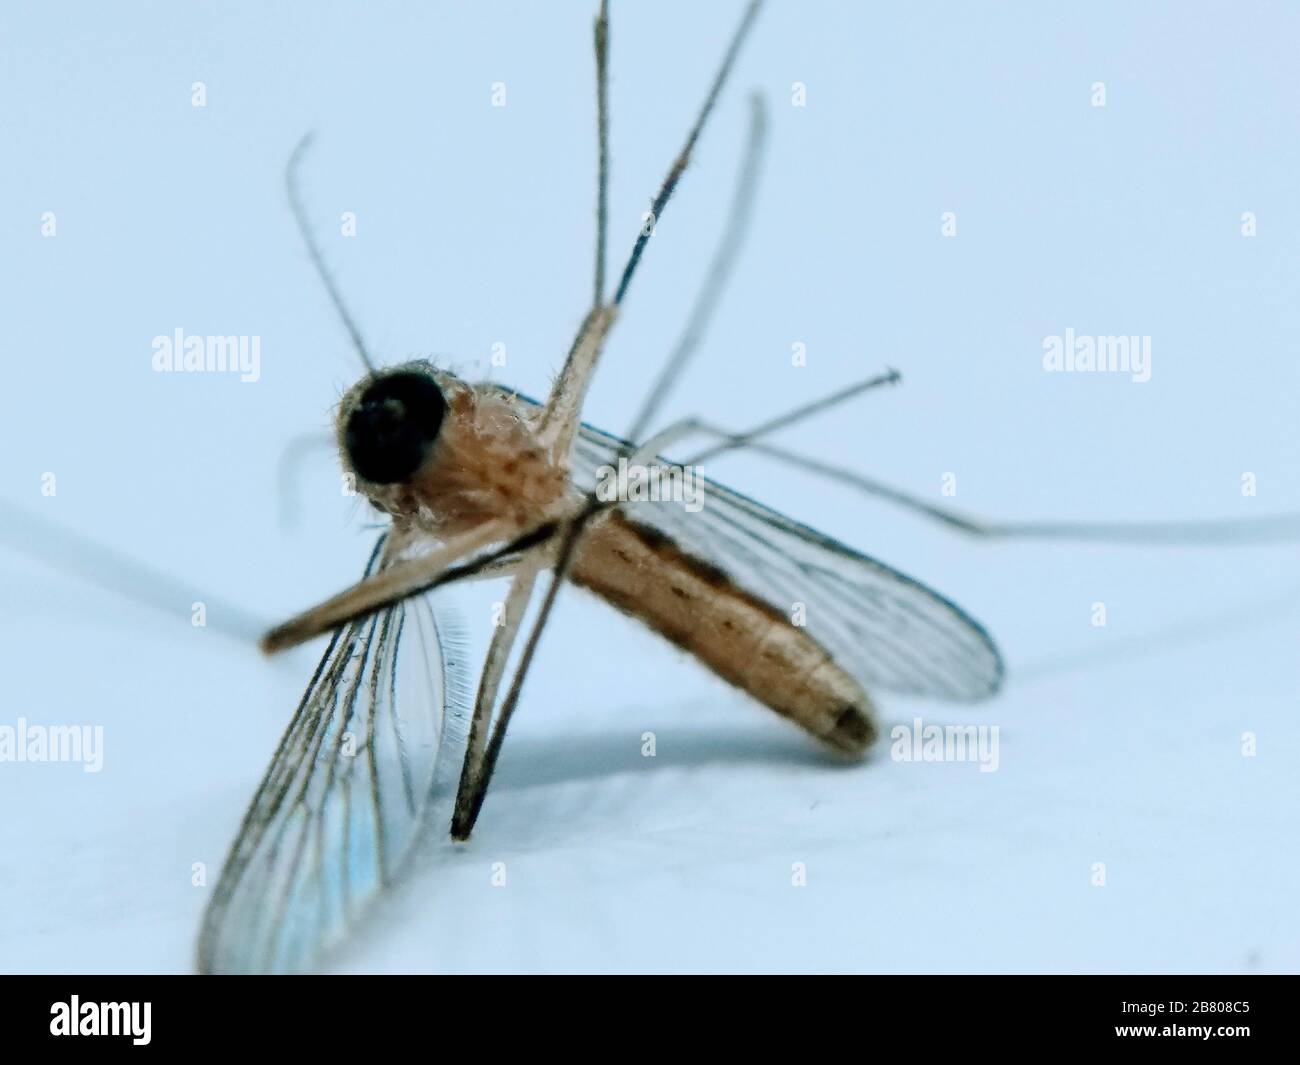 A picture of mosquito Stock Photo